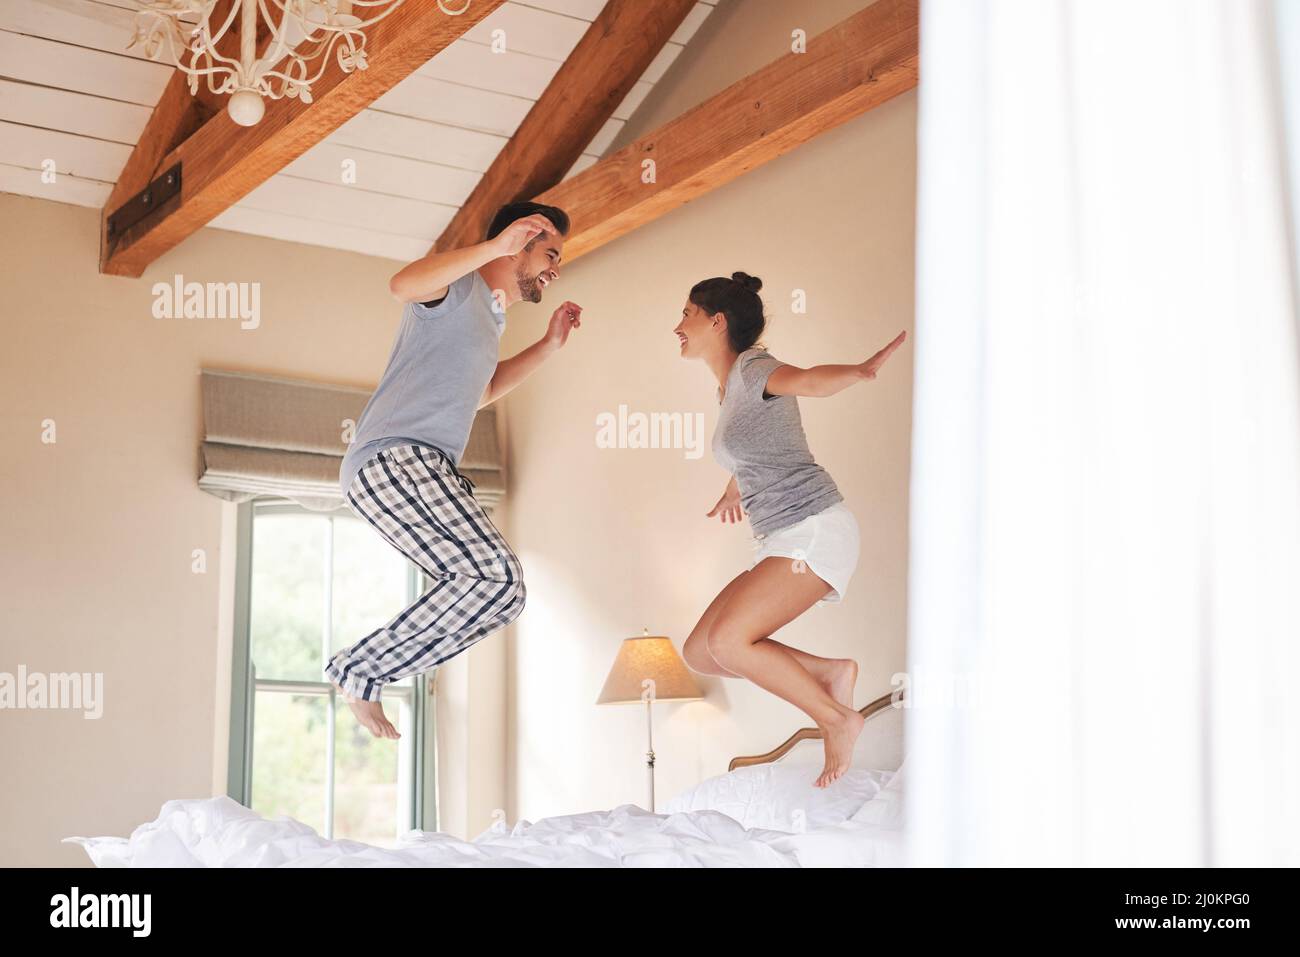 We bring a world of fun into each others lives. Full length shot of a cheerful young couple playing and jumping on their bed in their bedroom at home. Stock Photo